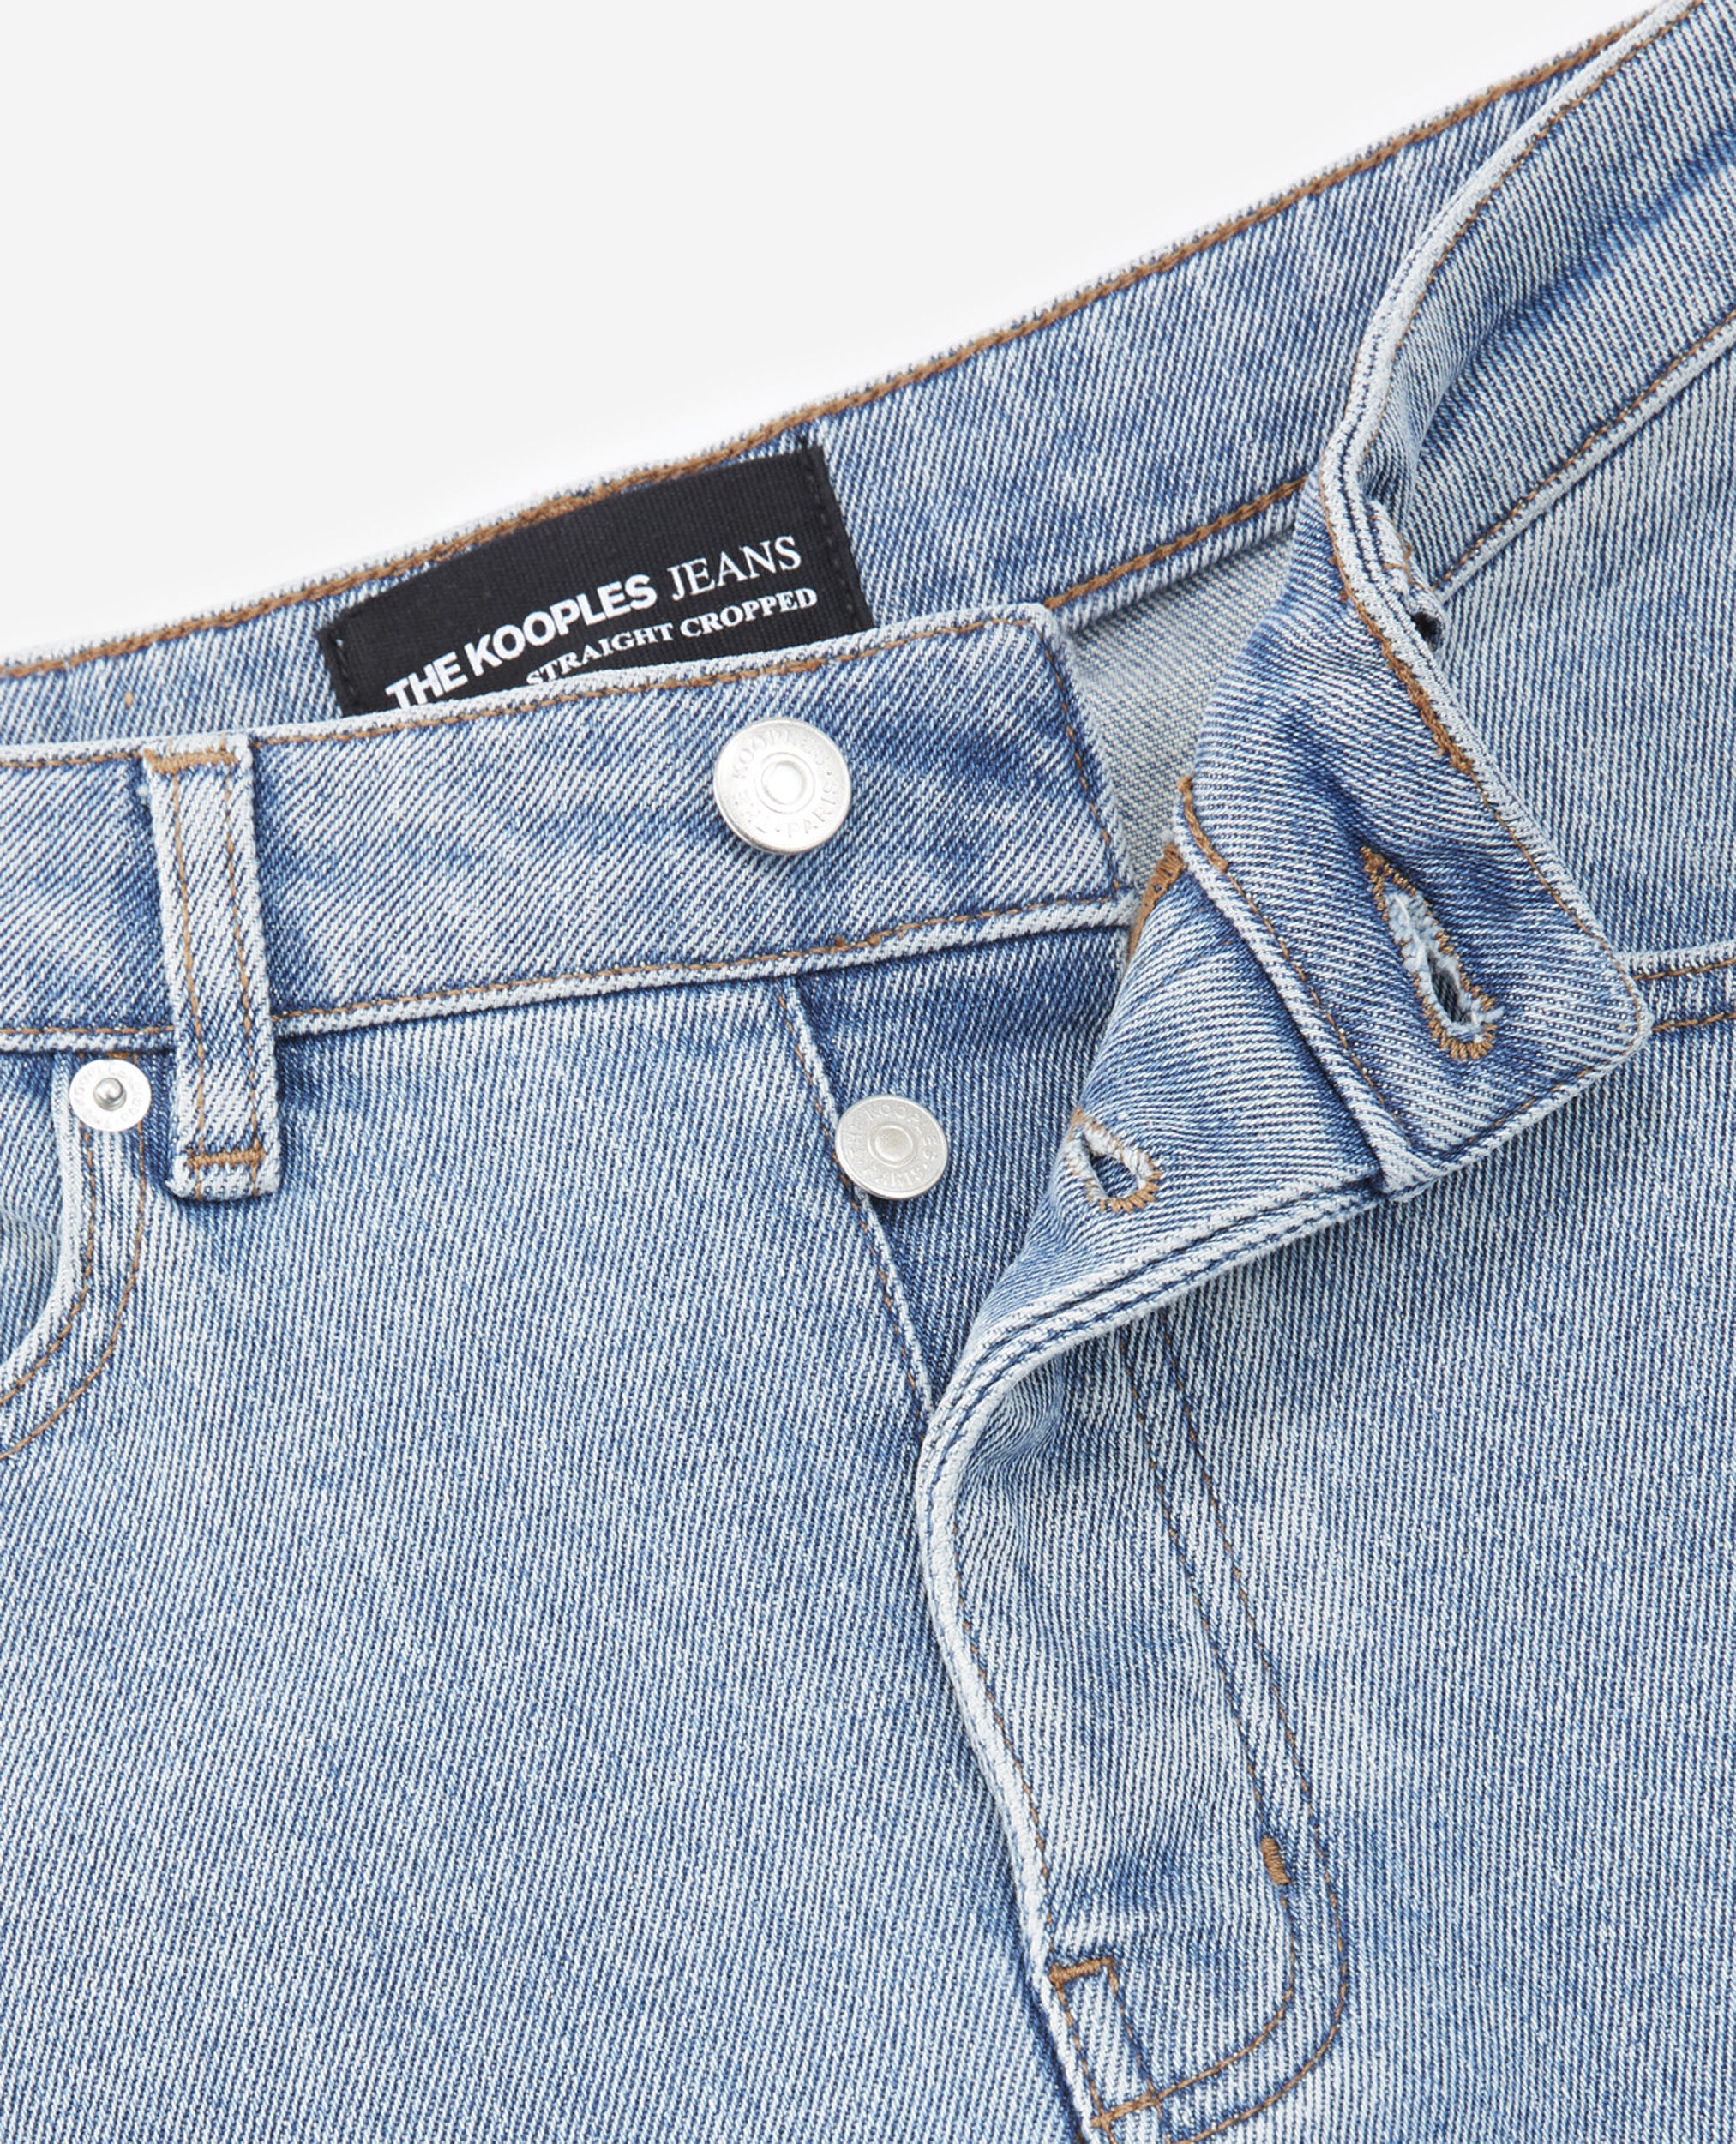 Faded, ripped blue jeans, BLUE WASHED, hi-res image number null